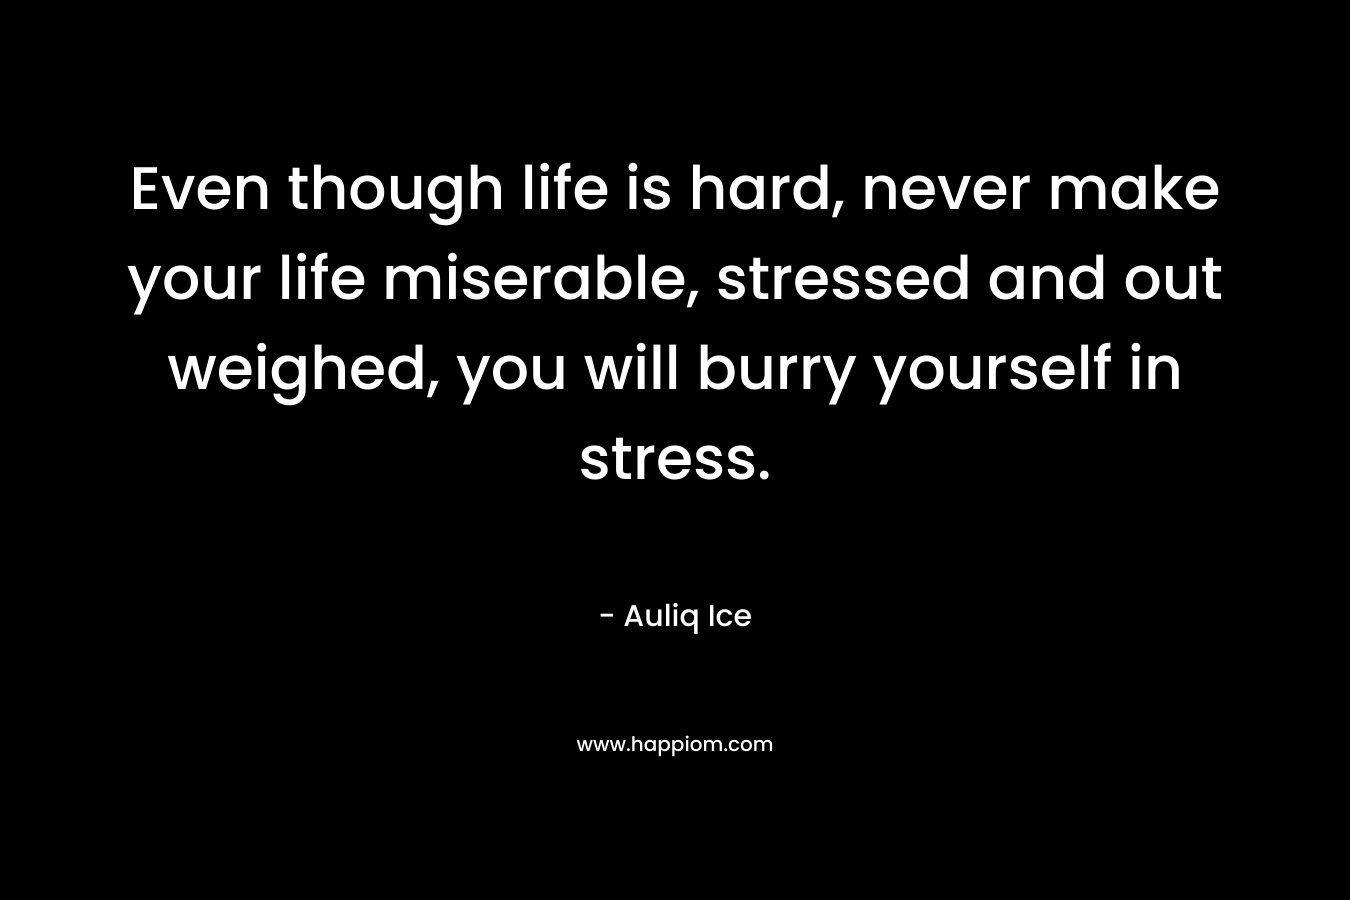 Even though life is hard, never make your life miserable, stressed and out weighed, you will burry yourself in stress.